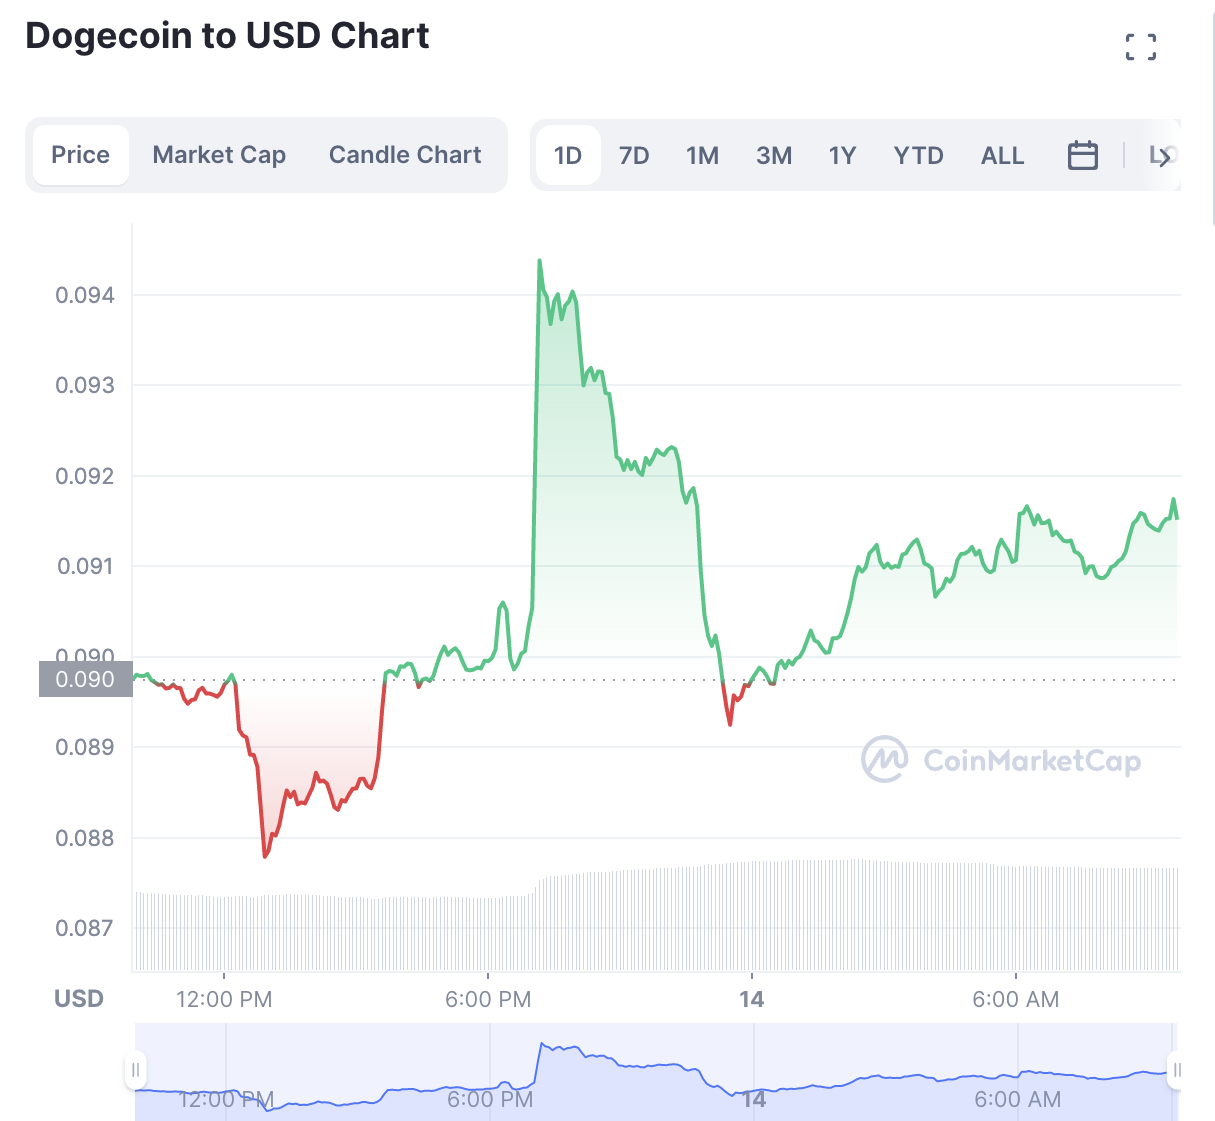 Investors weigh in their thoughts about the Dogecoin price